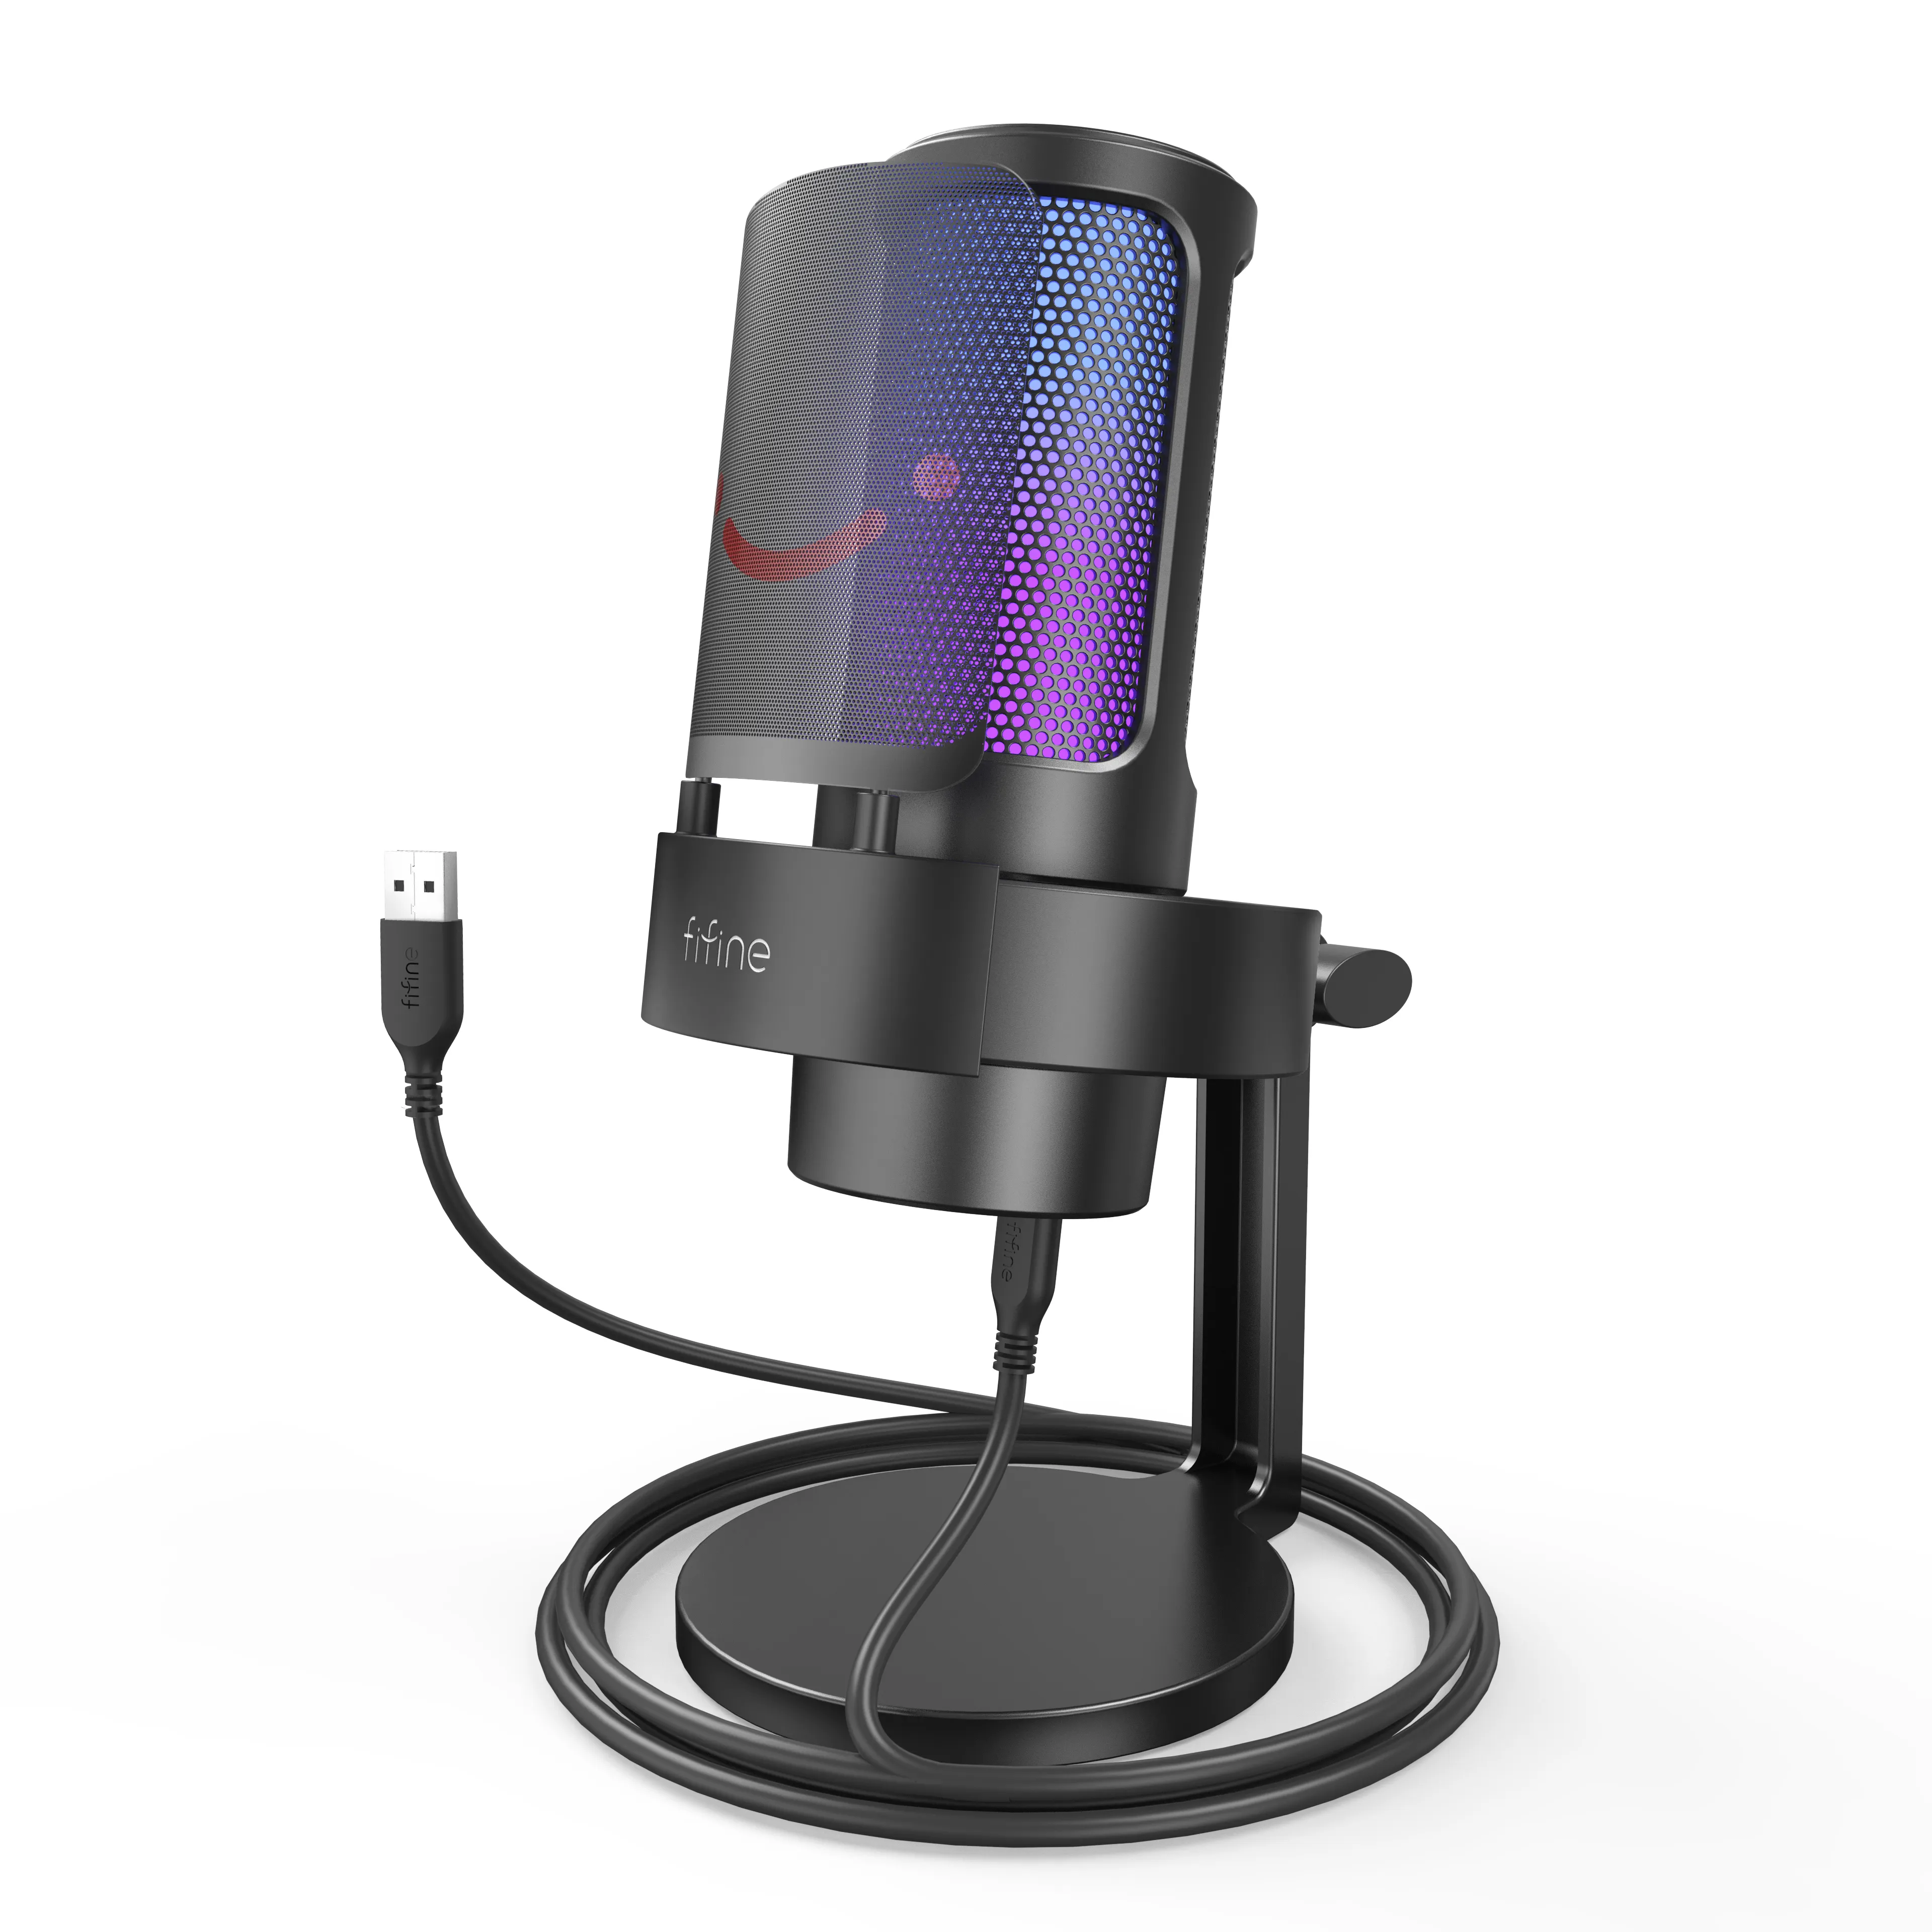 Desktop Computer Microphone China Trade,Buy China Direct From 